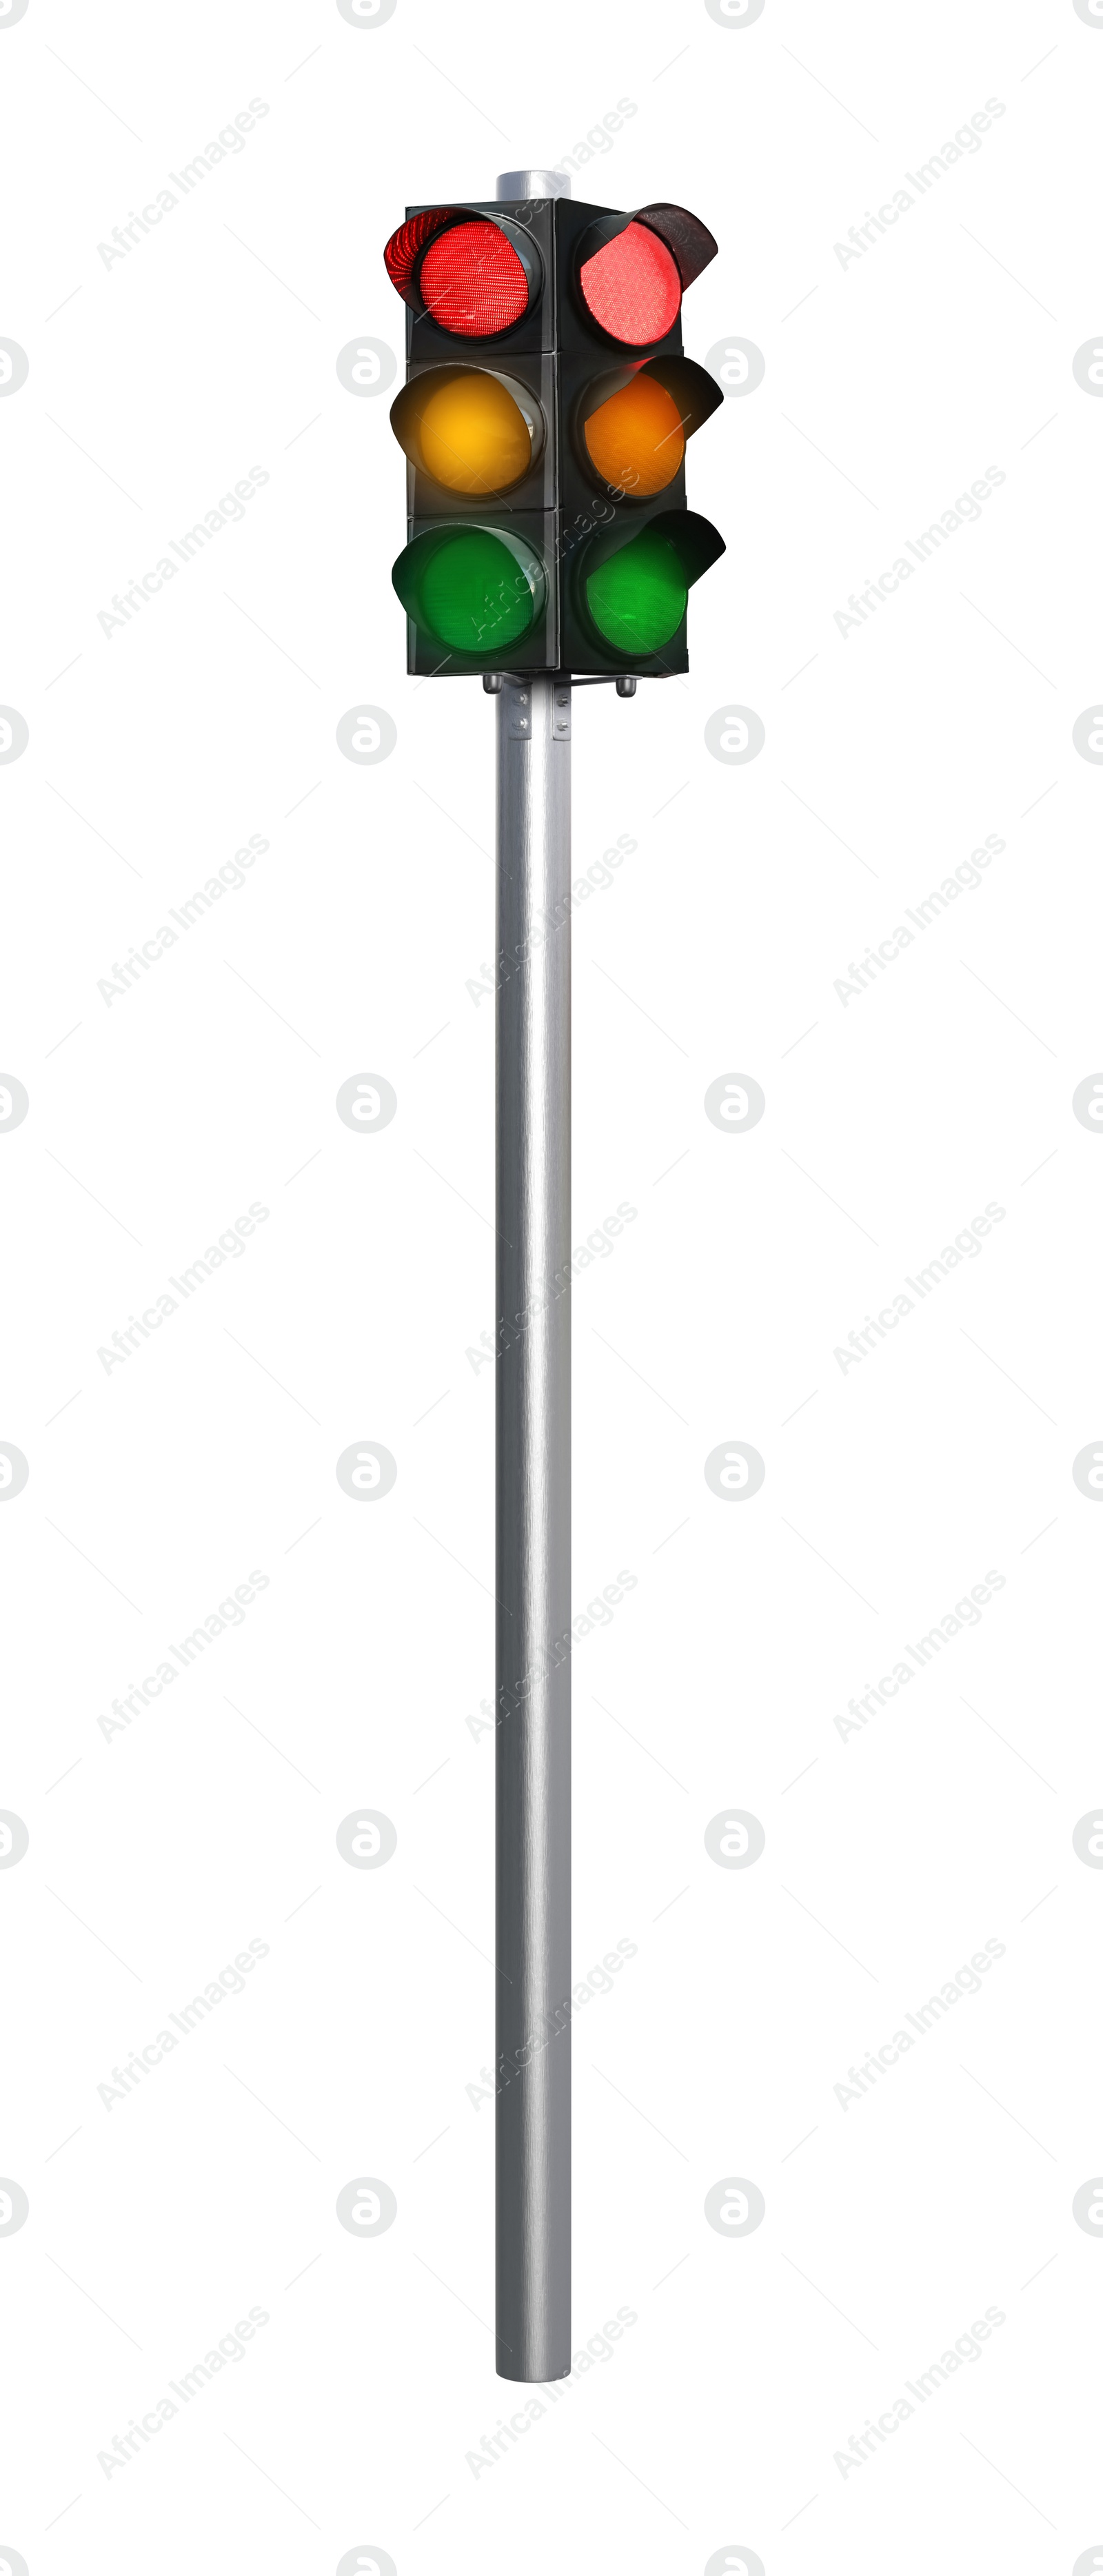 Image of Traffic lights with pole on white background